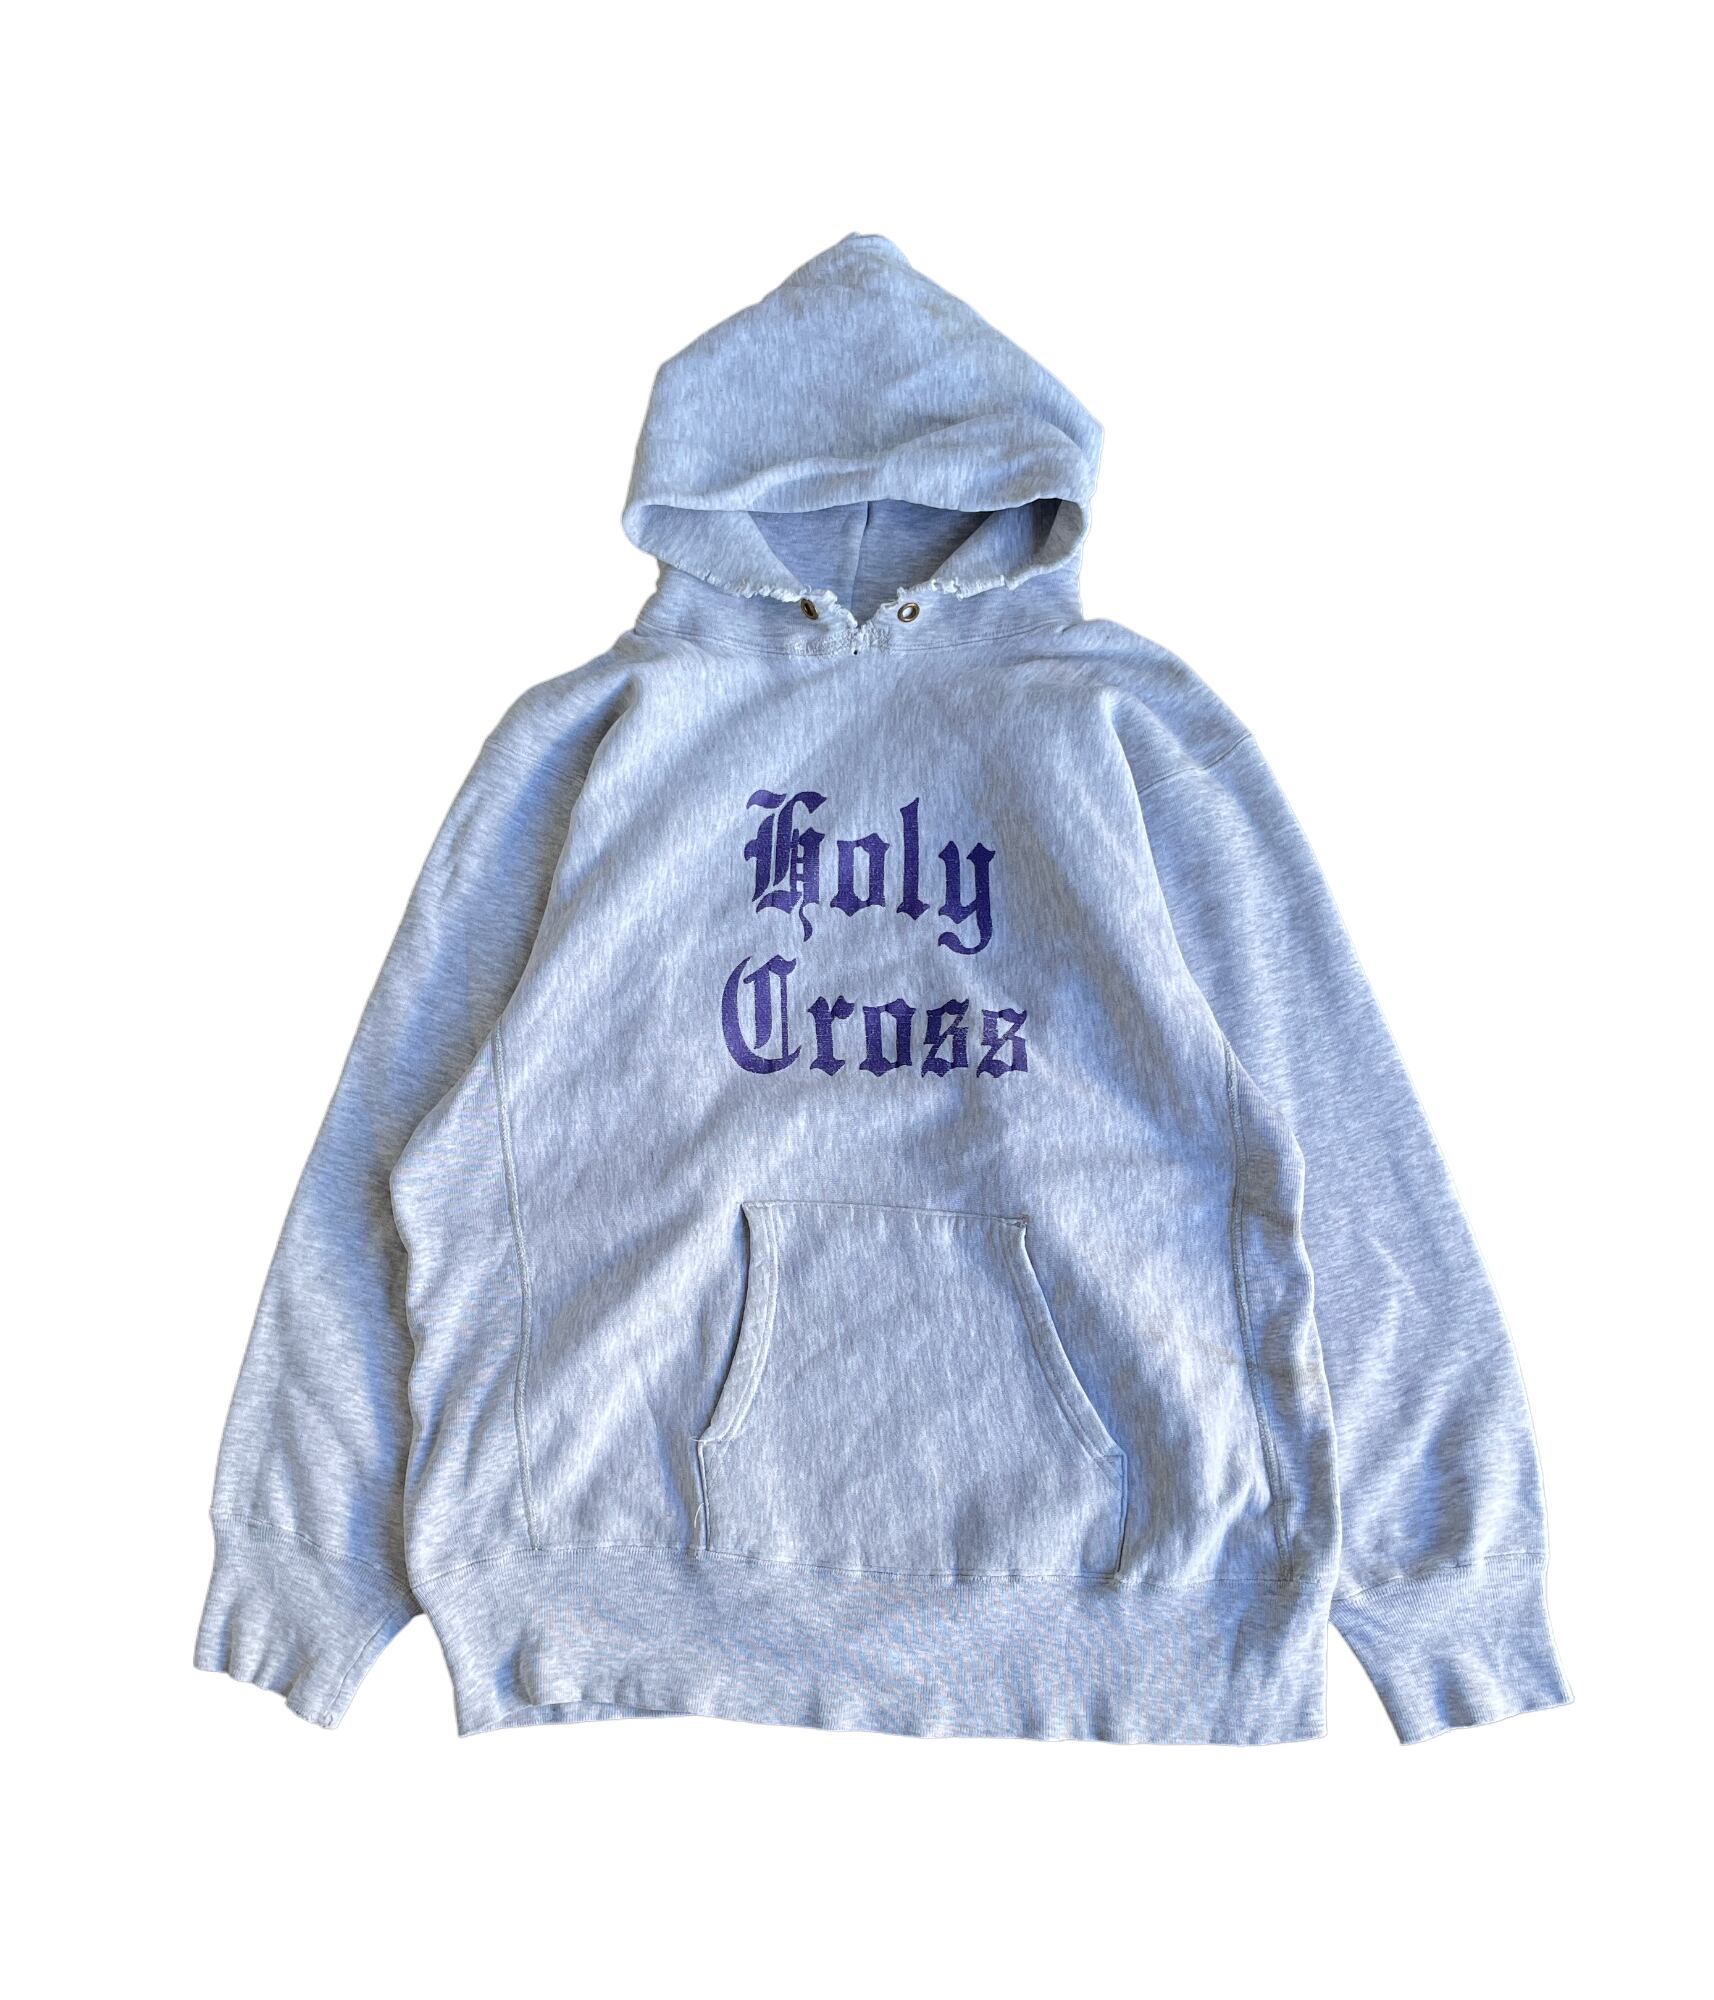 Vintage 80s XL Champion reverse weave hoodie -Holy cross- | BEGGARS  BANQUET公式通販サイト　古着・ヴィンテージ